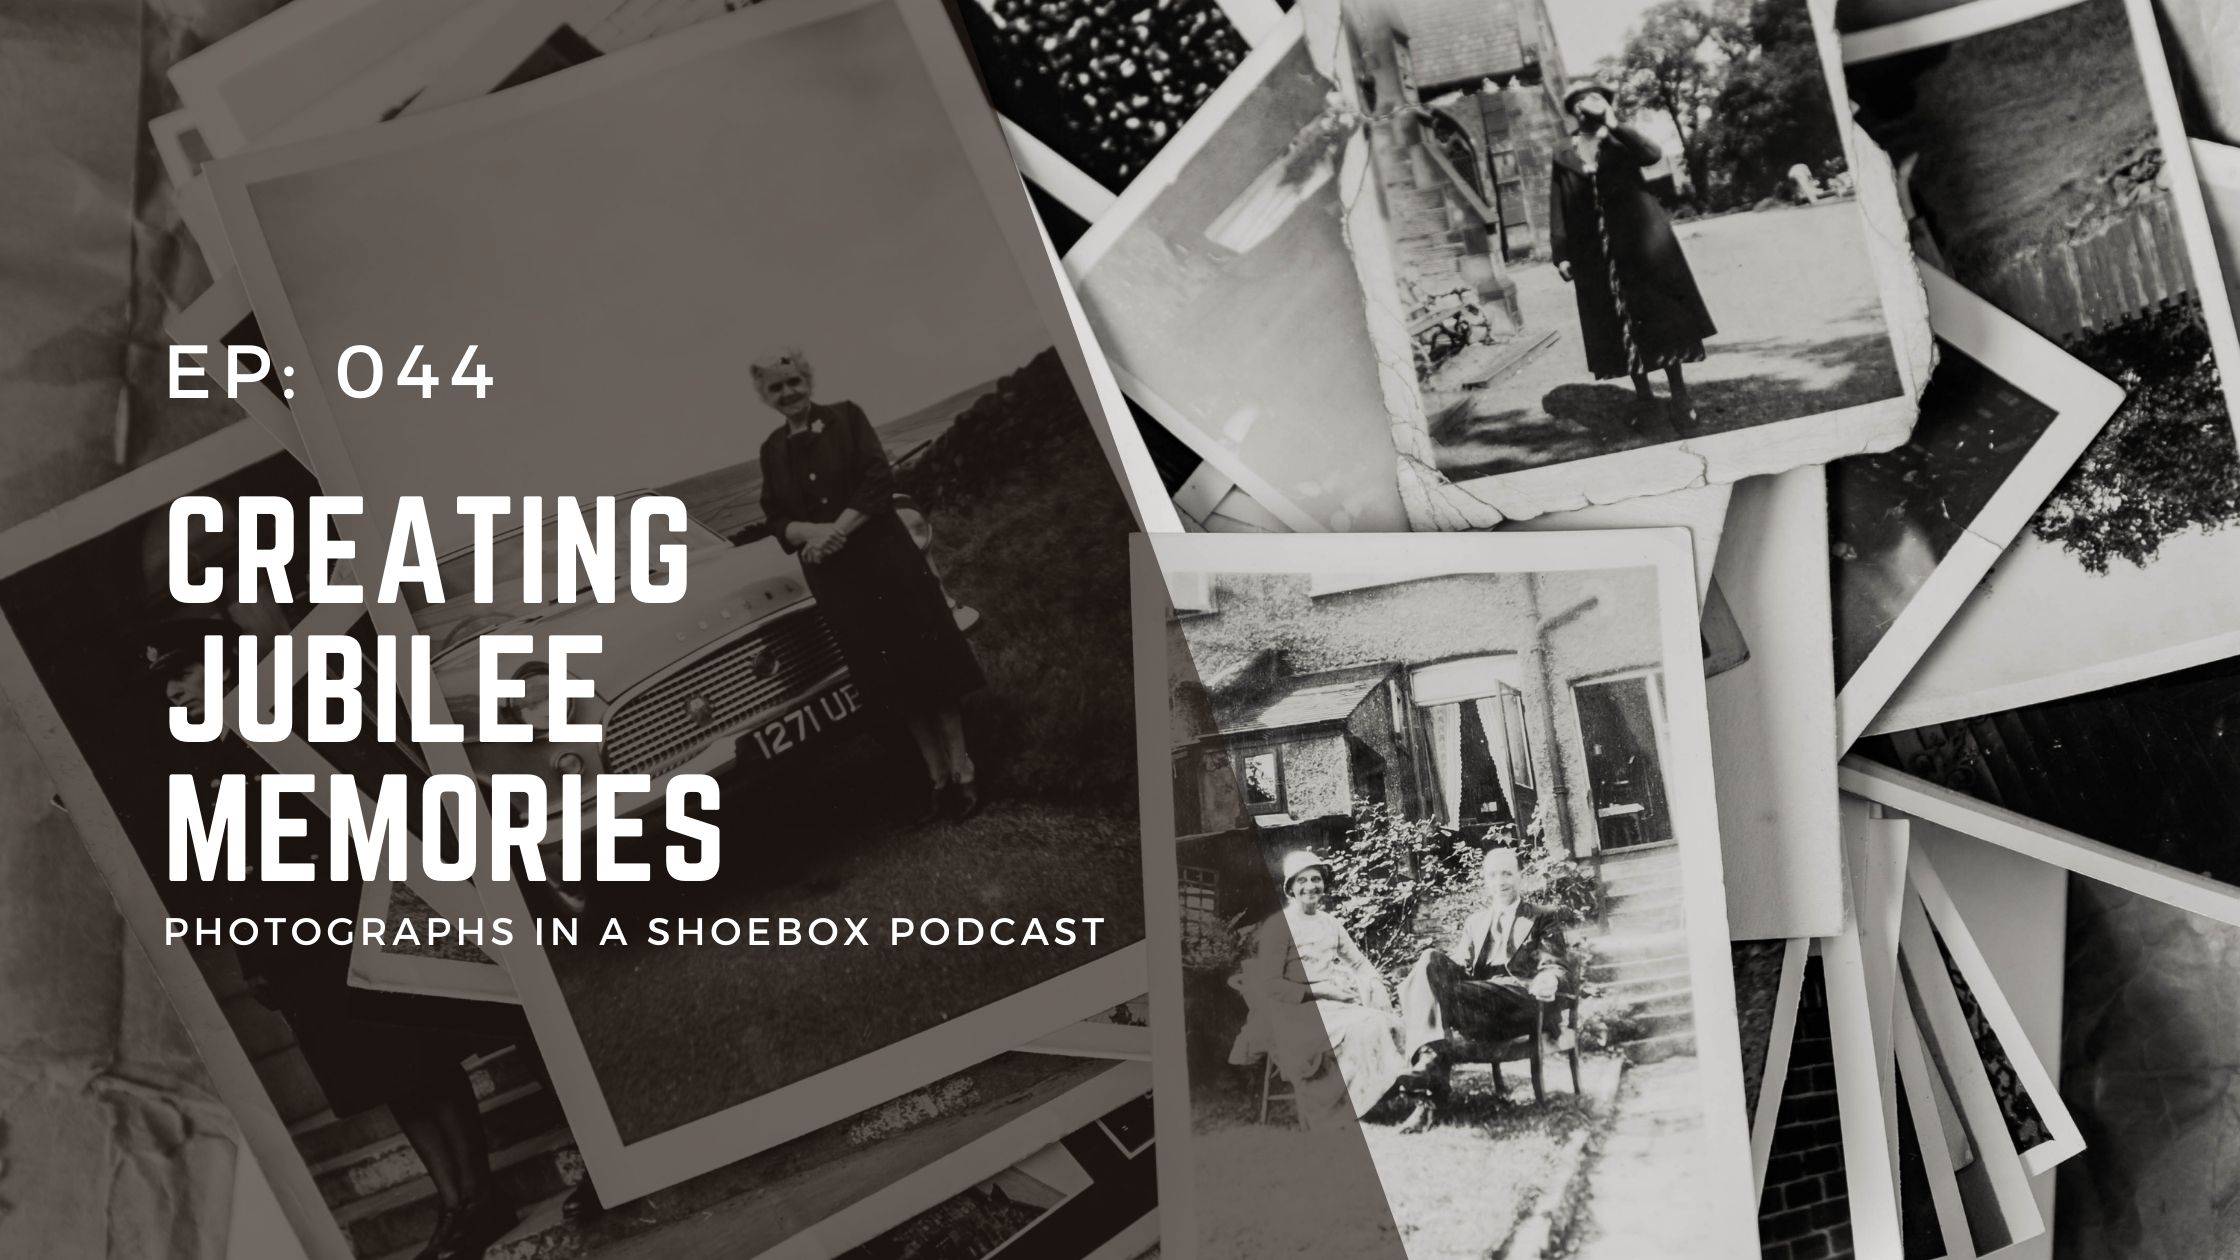 podcast cover artwork for photographs in a shoebox episode 044 creating jubilee memories